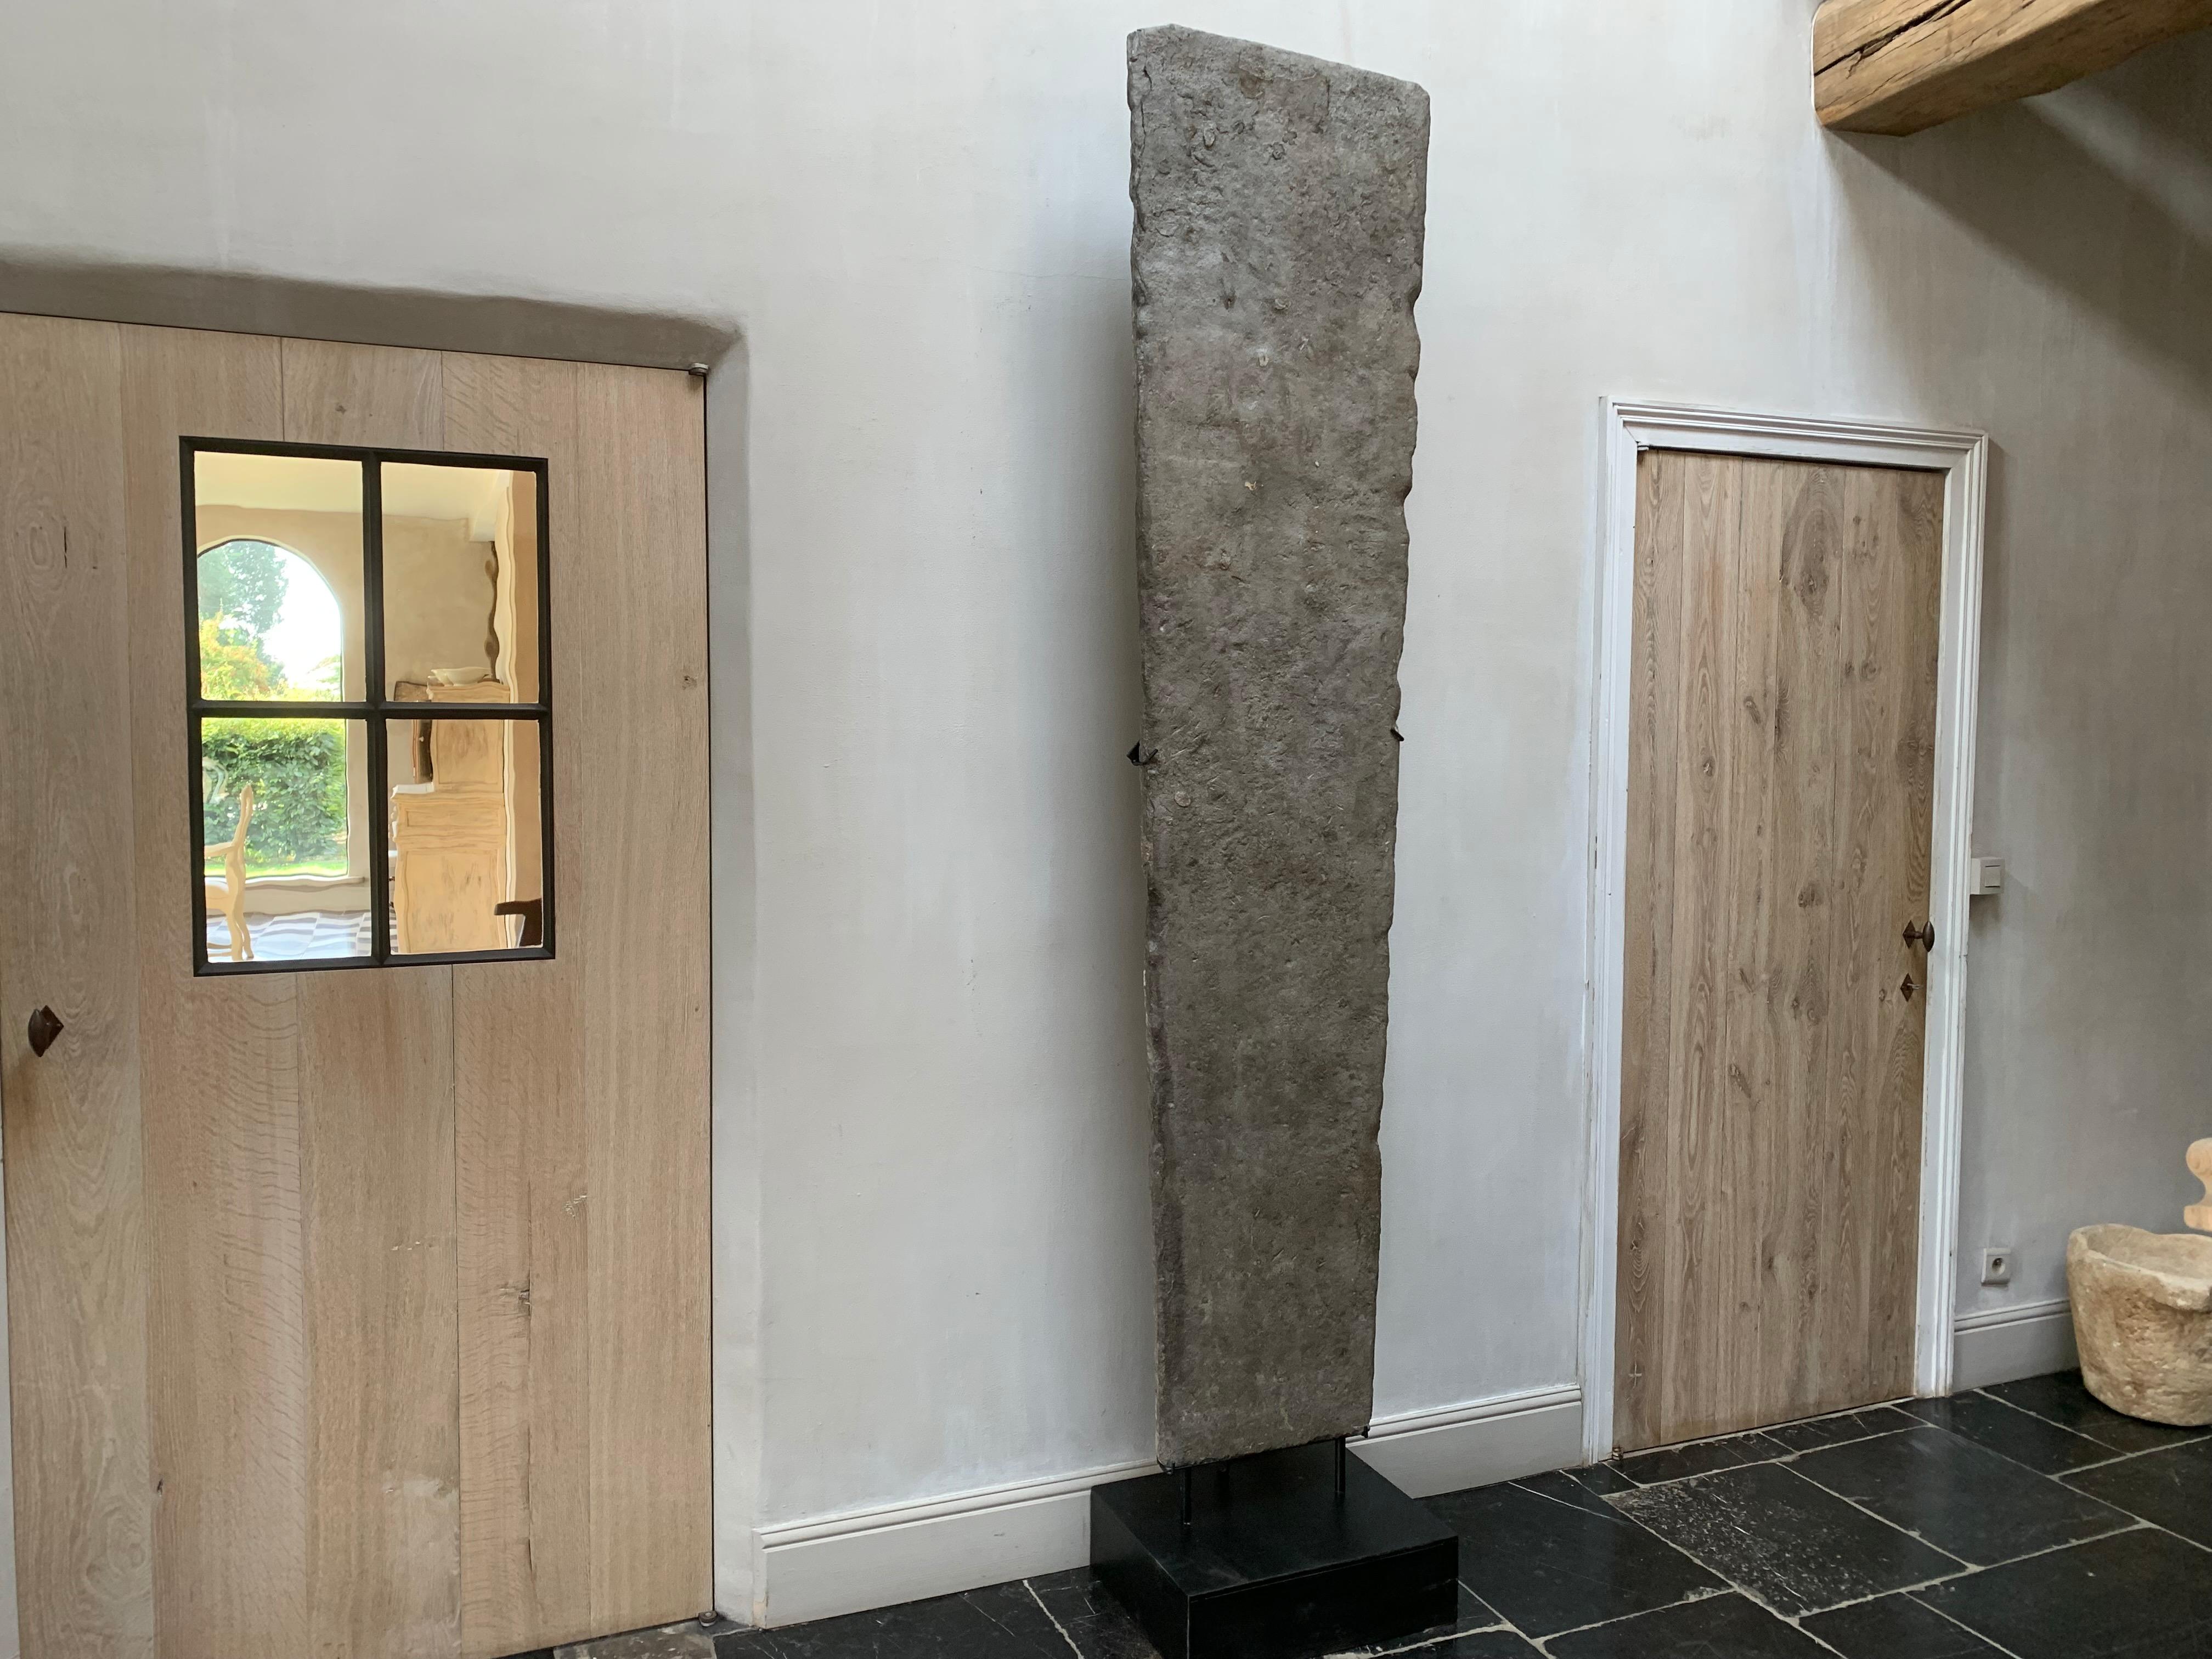 A 15th century French recuperated floor slab of huge proportions. Because of its beauty, unusual size and the richness of fossilles we decided to mount this piece as a sculpture.
We found it underneath a 17th century burgundy flooring in a land